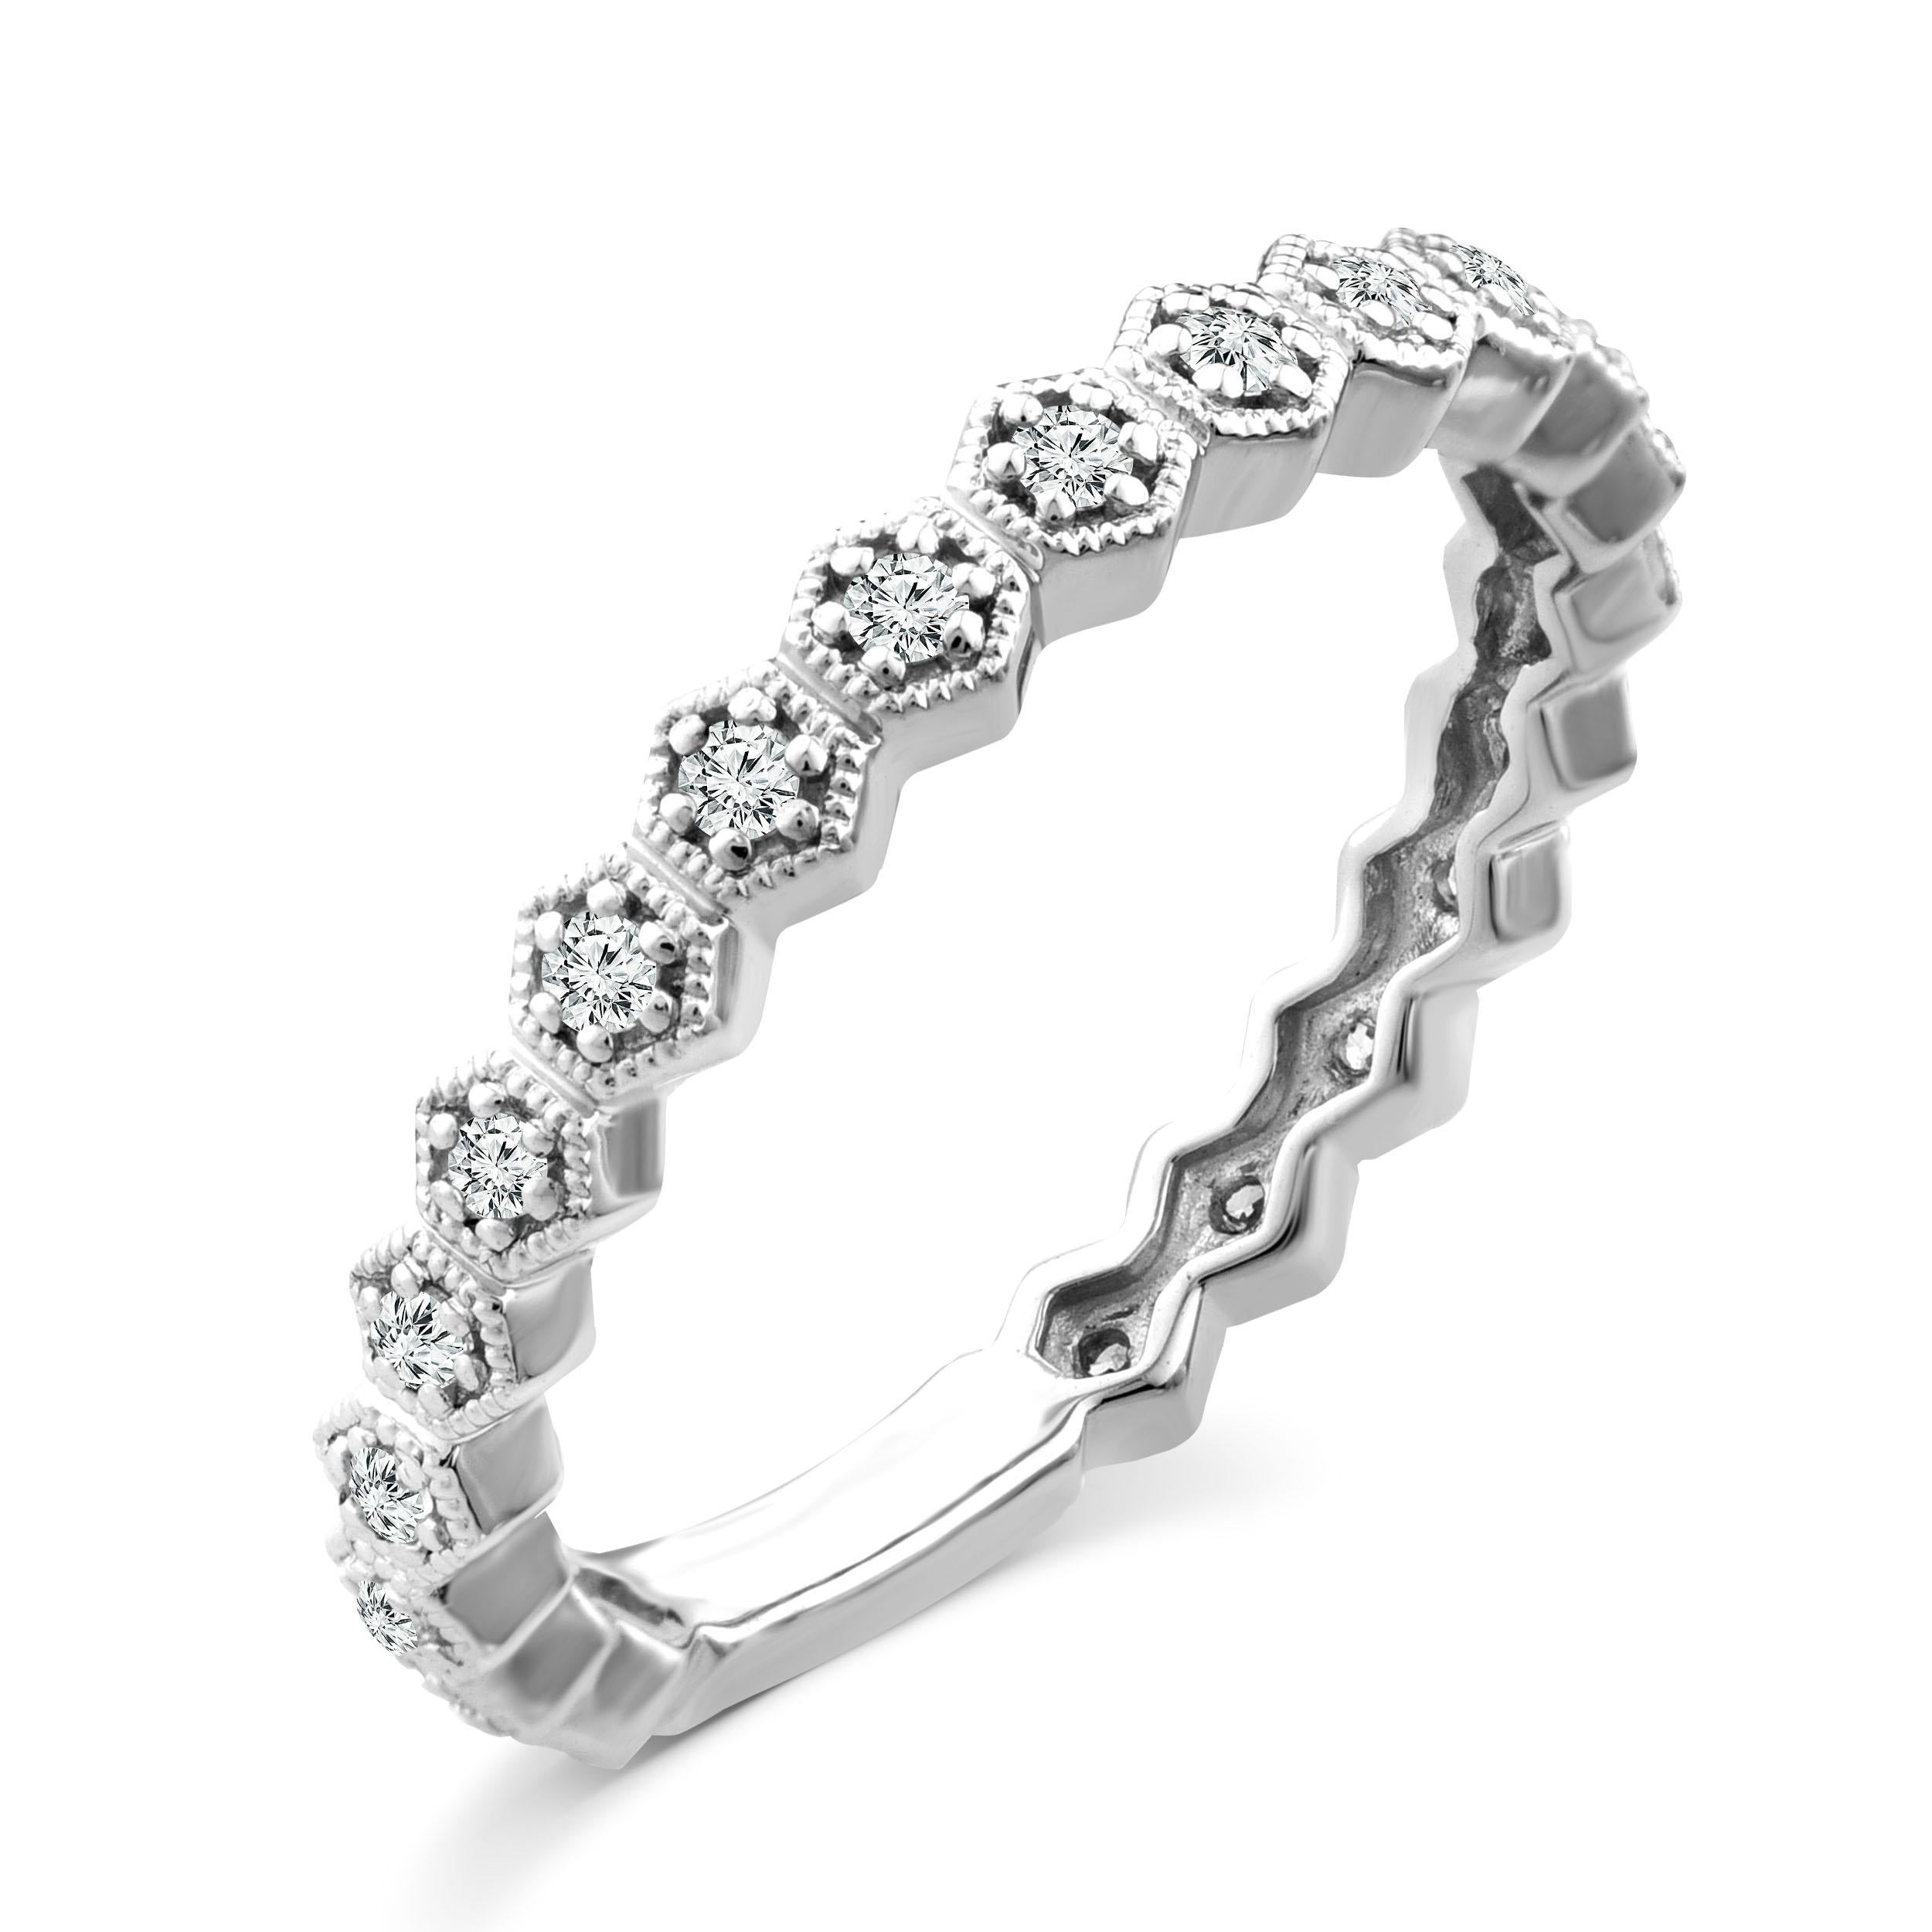 In trend with dainty and minimalistic jewelry, this romantic piece is the perfect stackable ring yet it's chic enough to wear as a standout. In addition to a stylish everyday wear, this diamond fashion band can also be worn as a unique wedding band,